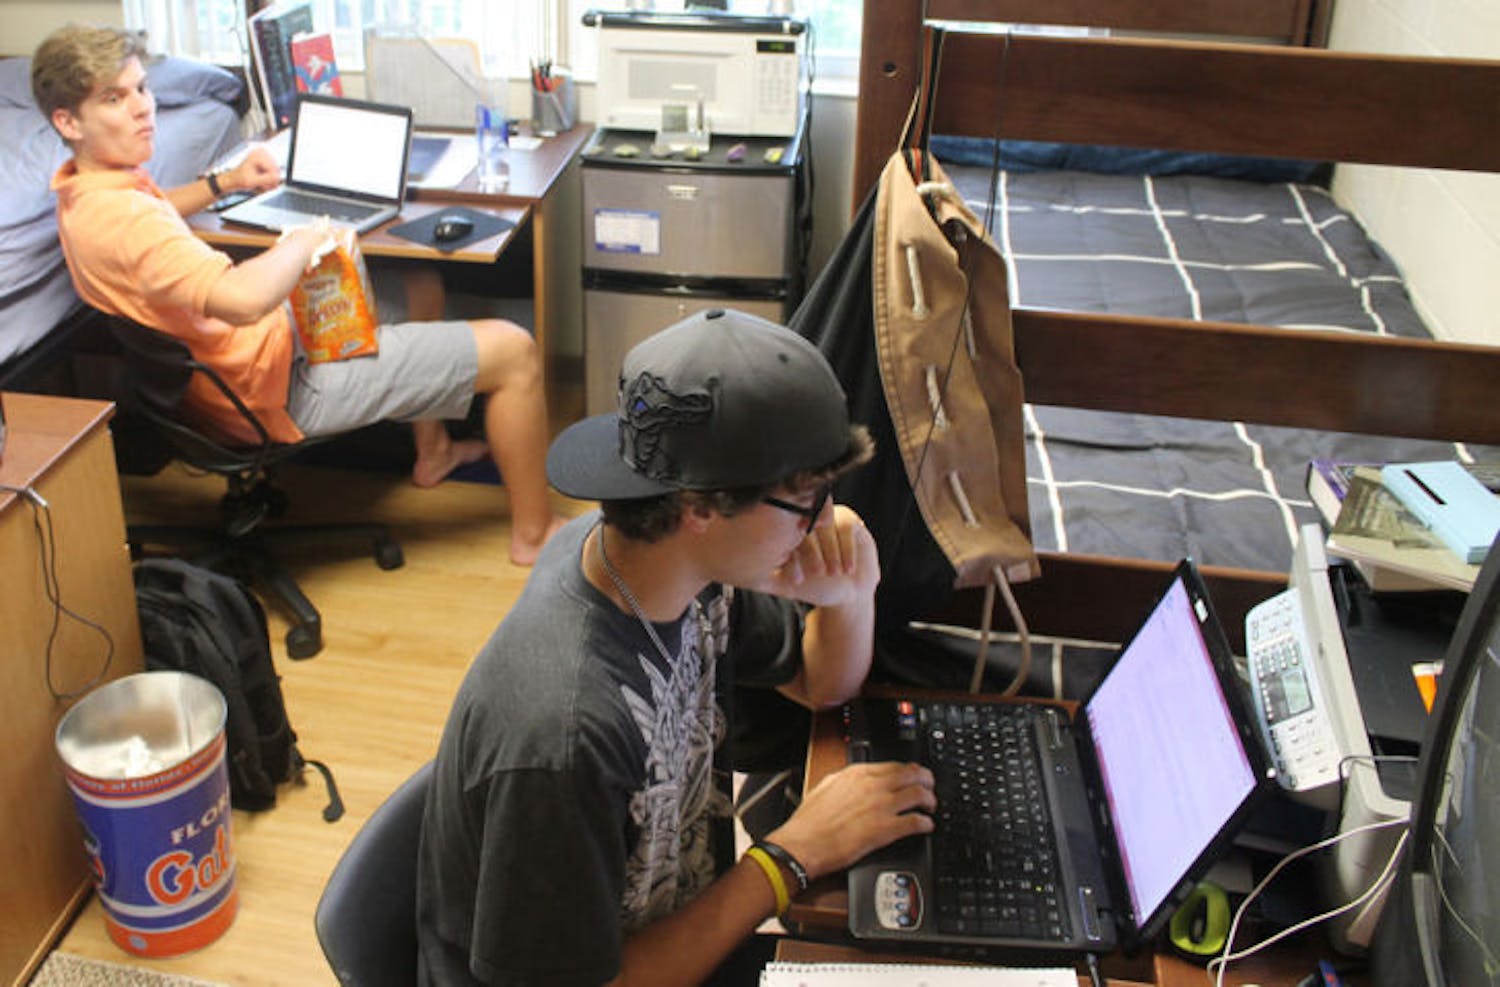 Animal science sophomore Justin Hanson, 19, right, and engineering freshman William Walker, 18, left, pass time in their dorm room Monday afternoon in Simpson Hall.